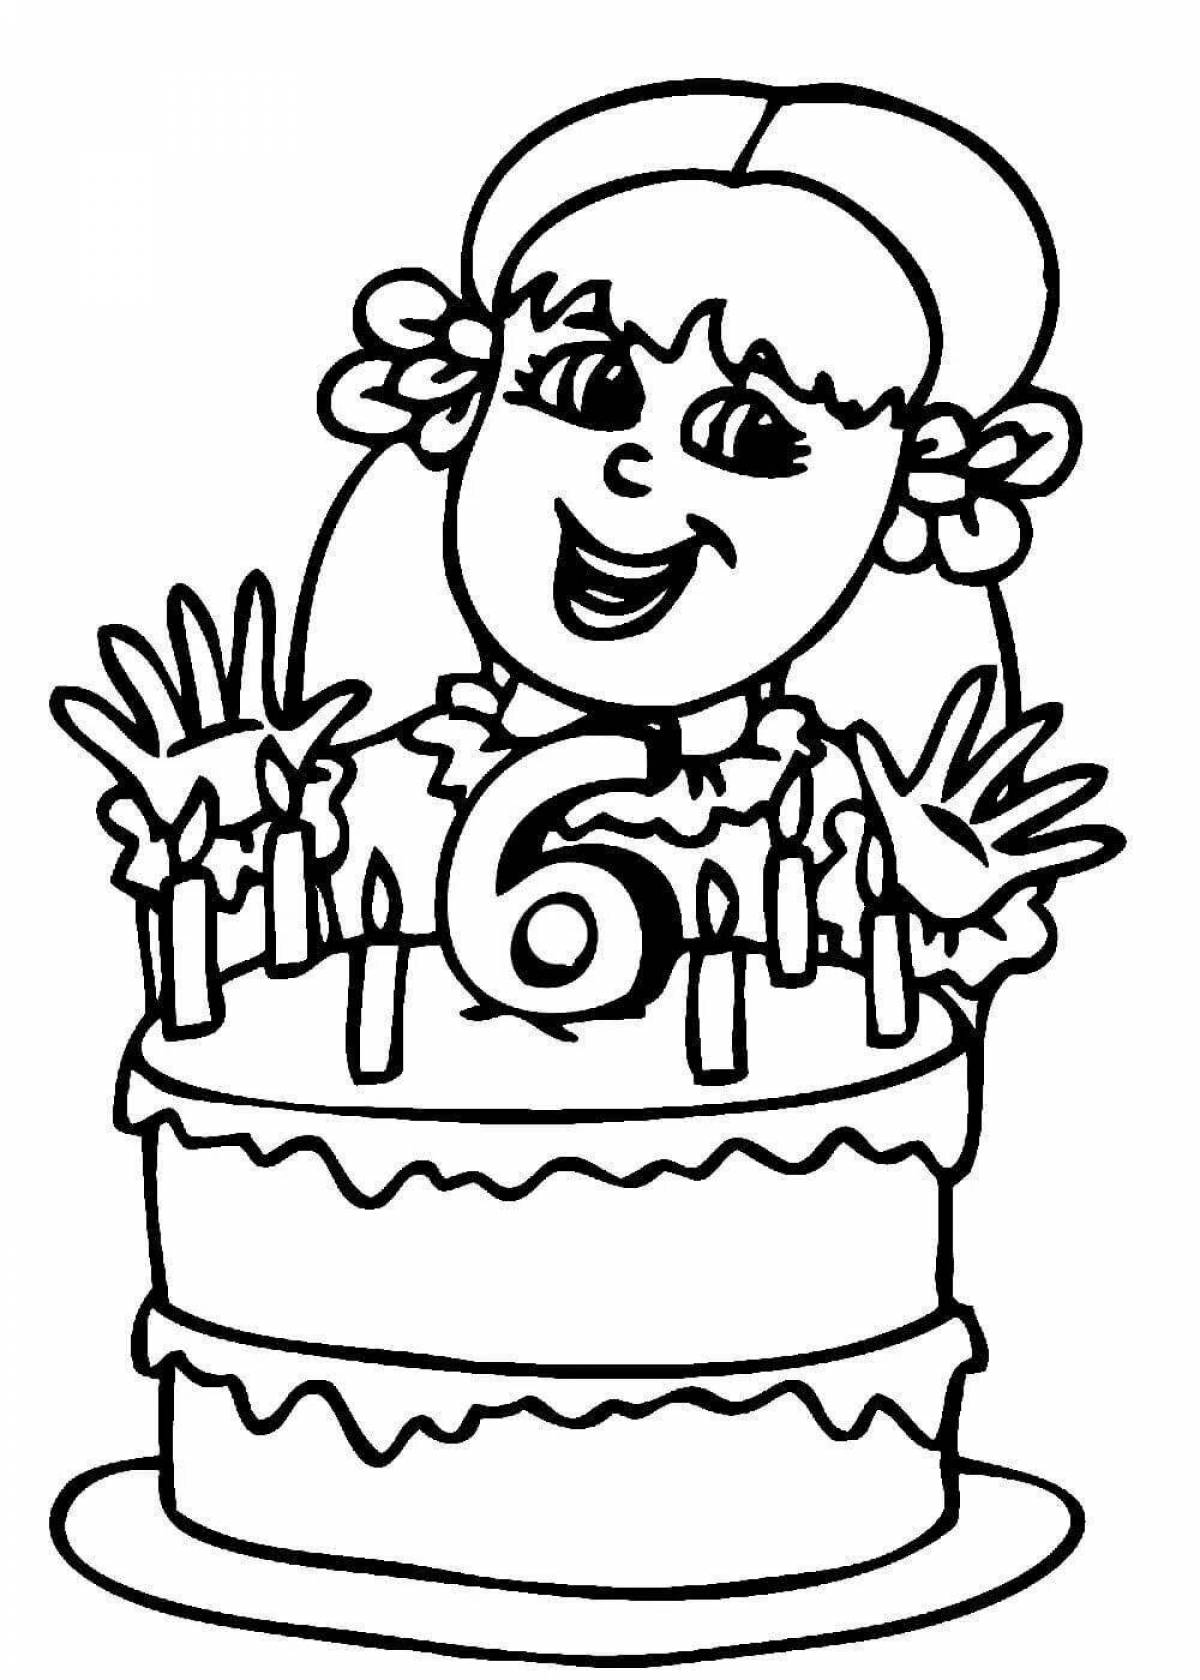 Color-frenzy birthday coloring page for 10 years